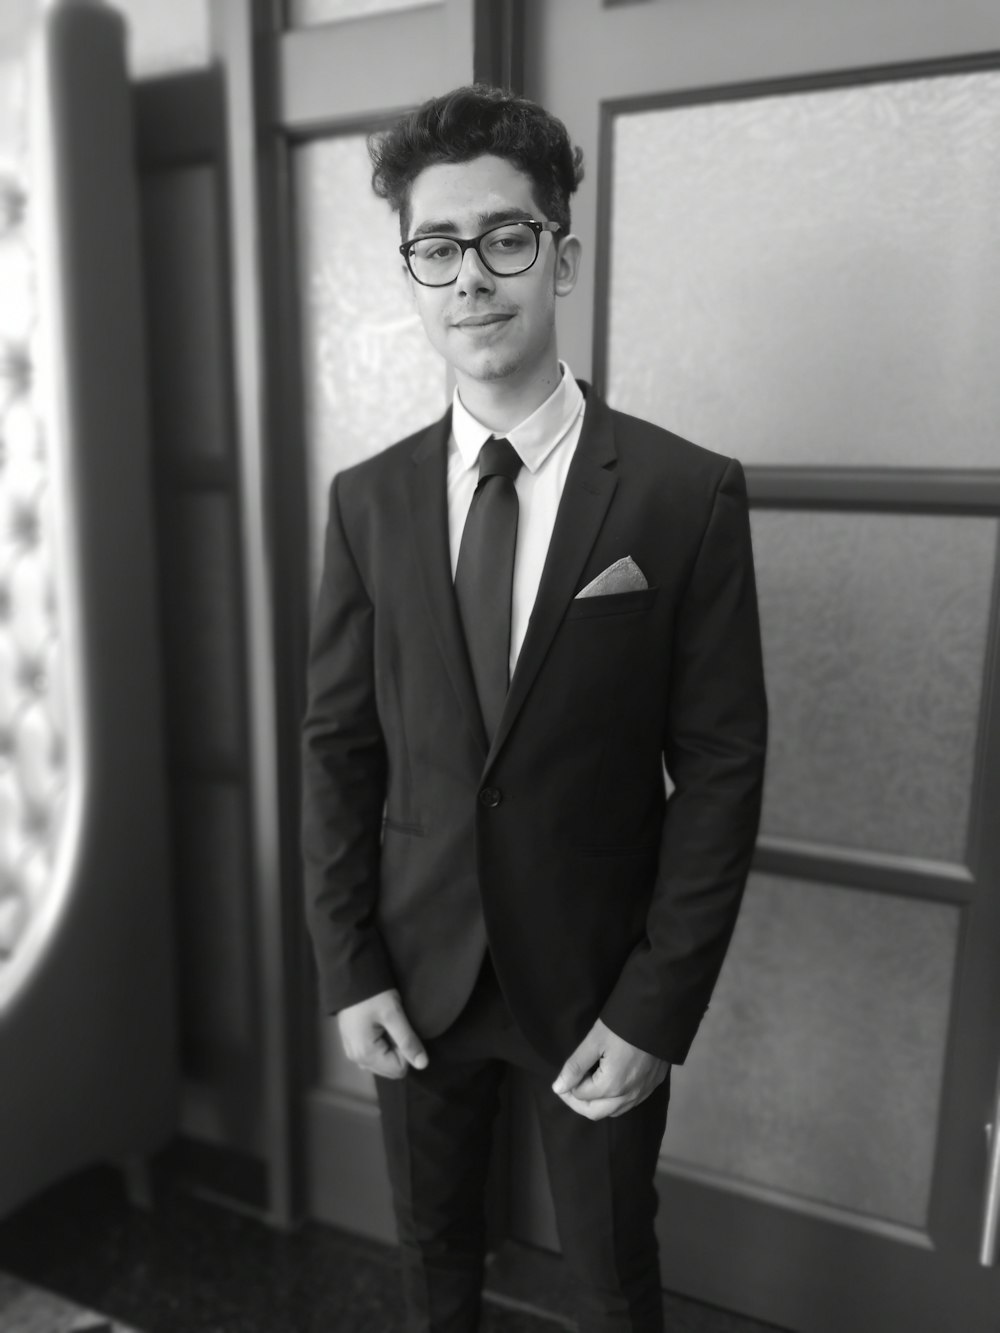 grayscale photography of man wearing eyeglasses